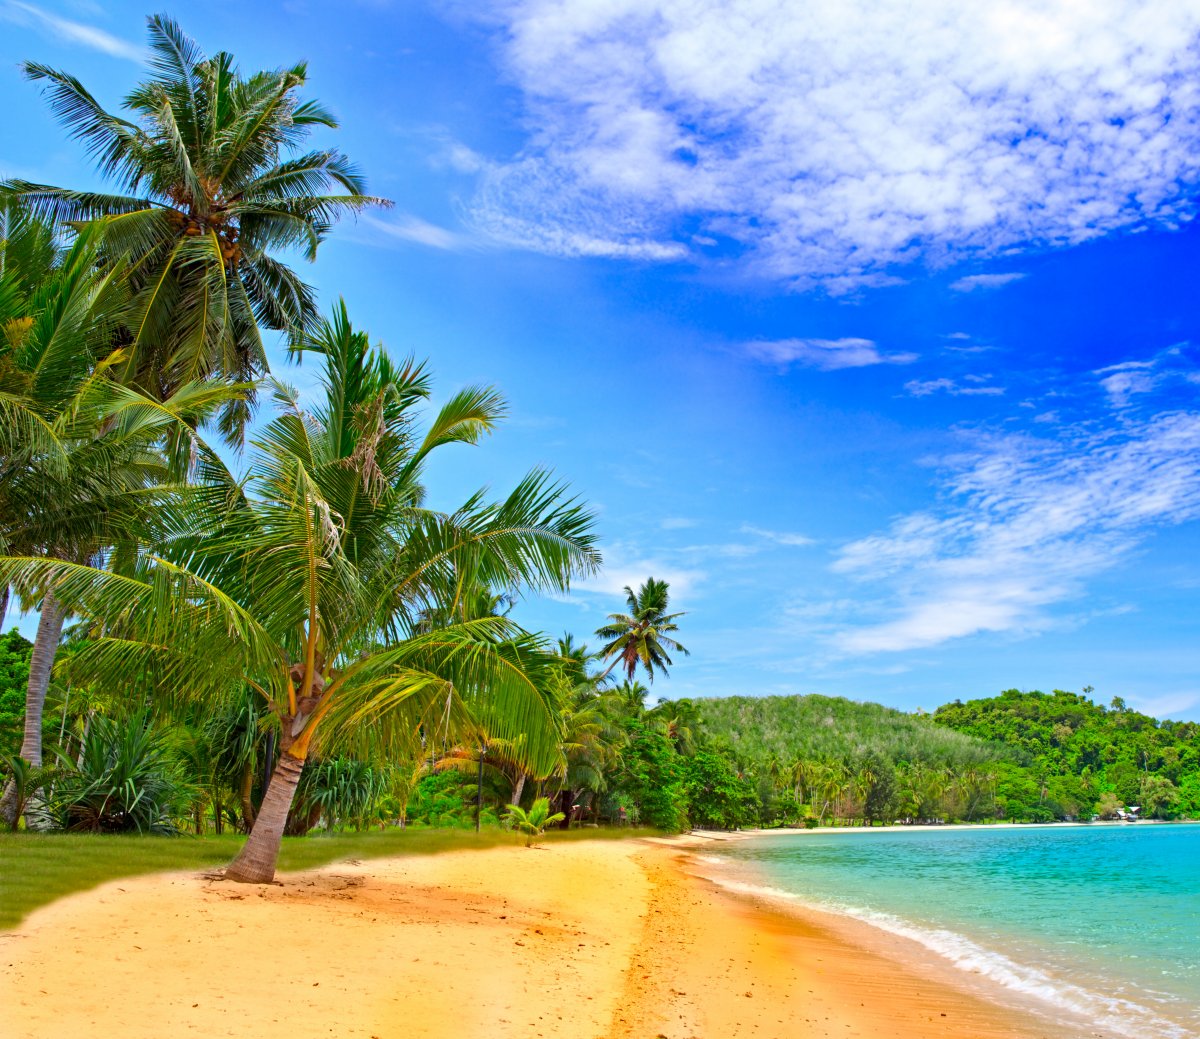 Pictures of coconut trees on the seaside